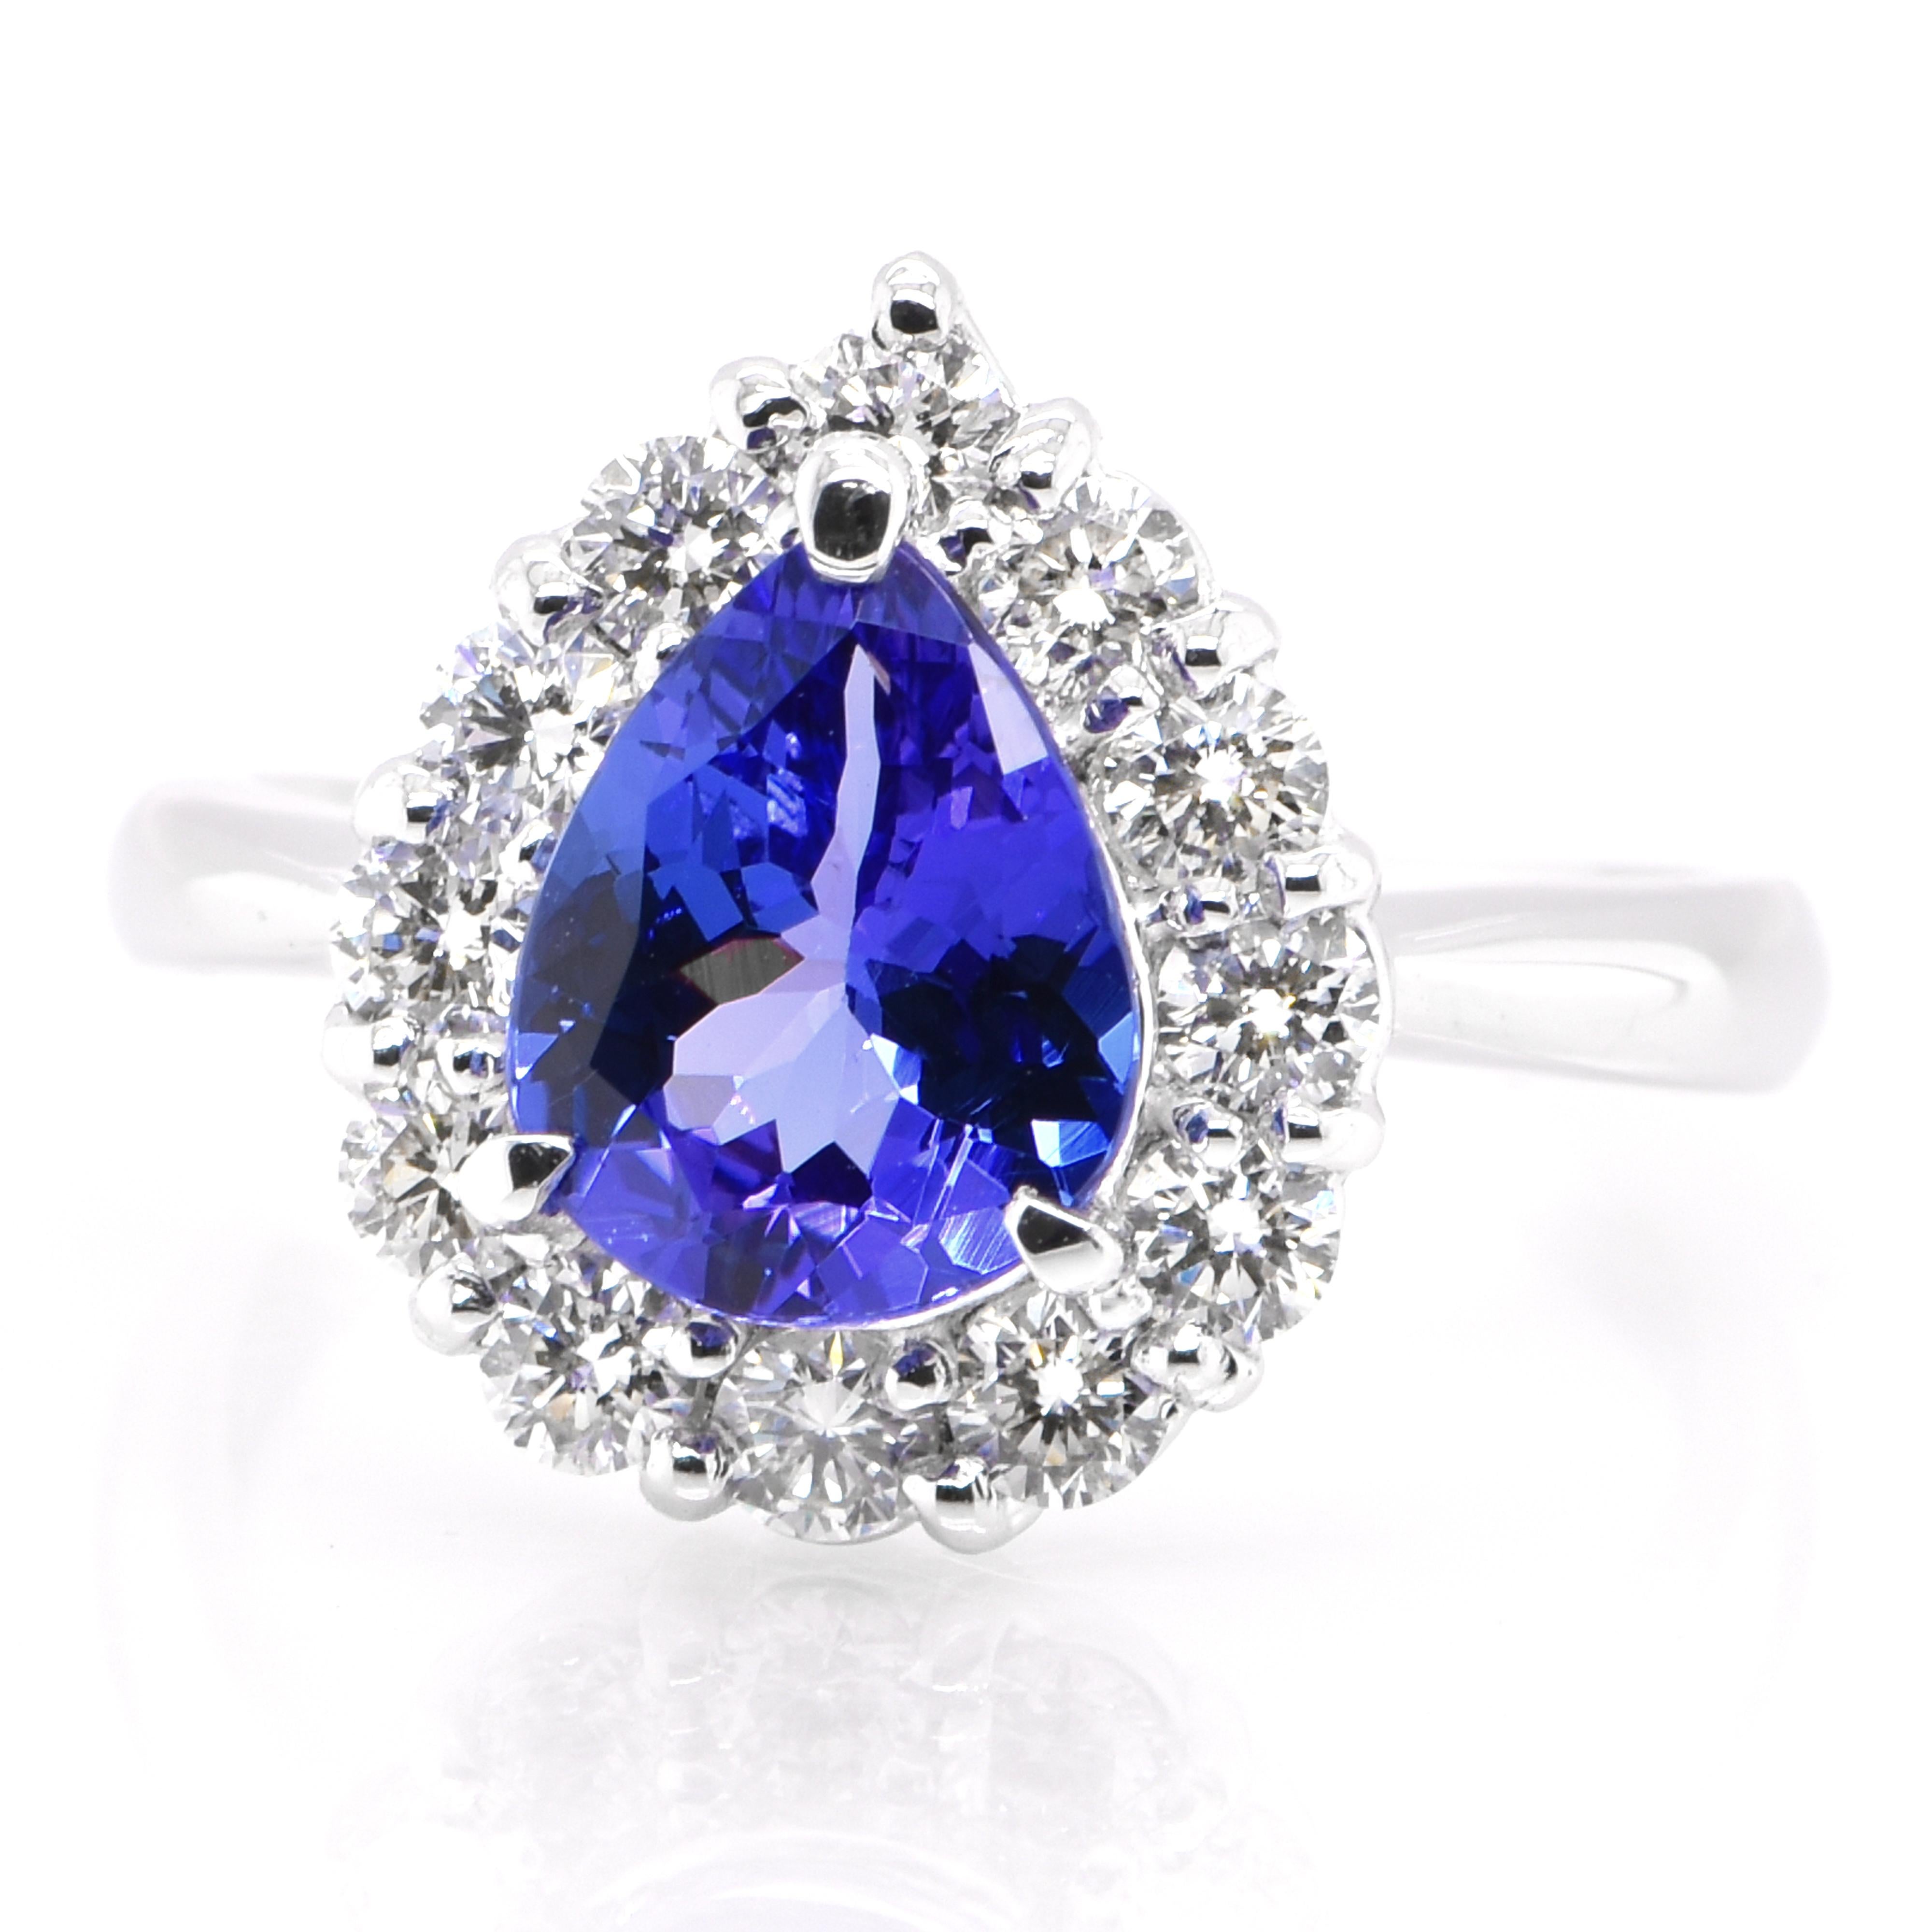 A beautiful ring featuring a 1.64 Carat Natural Tanzanite and 0.71 Carats Diamond Accents set in Platinum. Tanzanite's name was given by Tiffany and Co after its only known source: Tanzania. Tanzanite displays beautiful pleochroic colors meaning